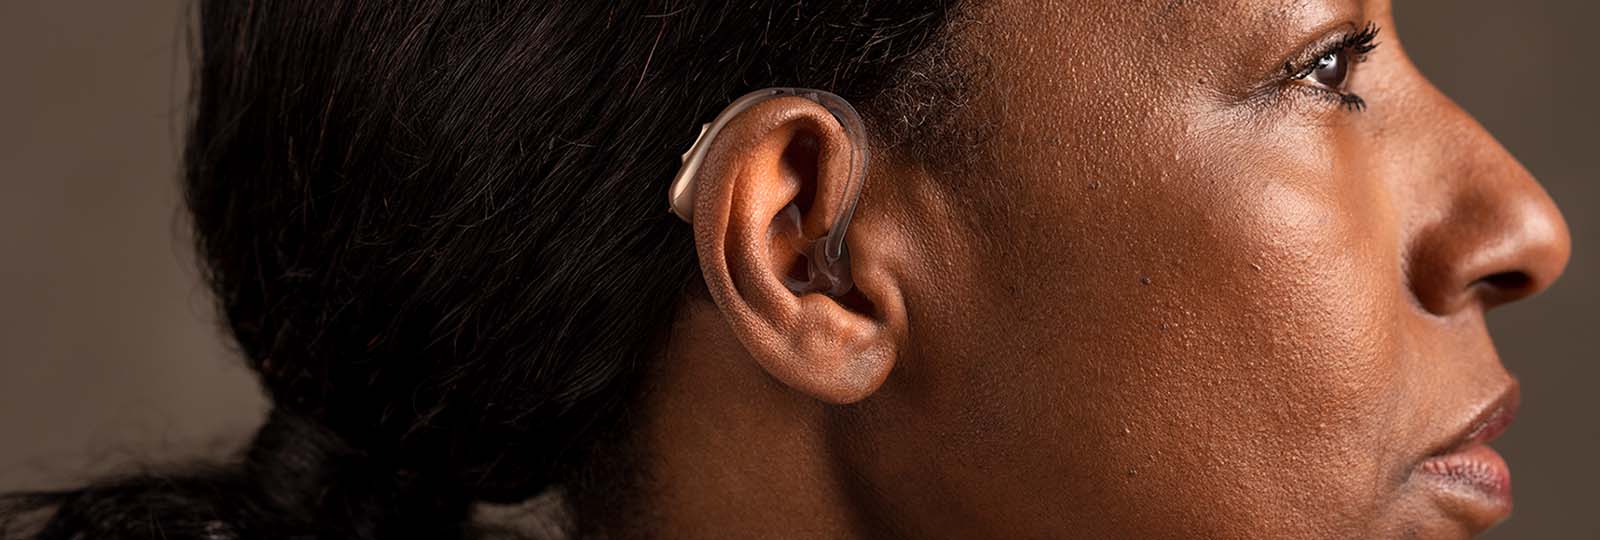 Woman with BiCore B M hearing aid